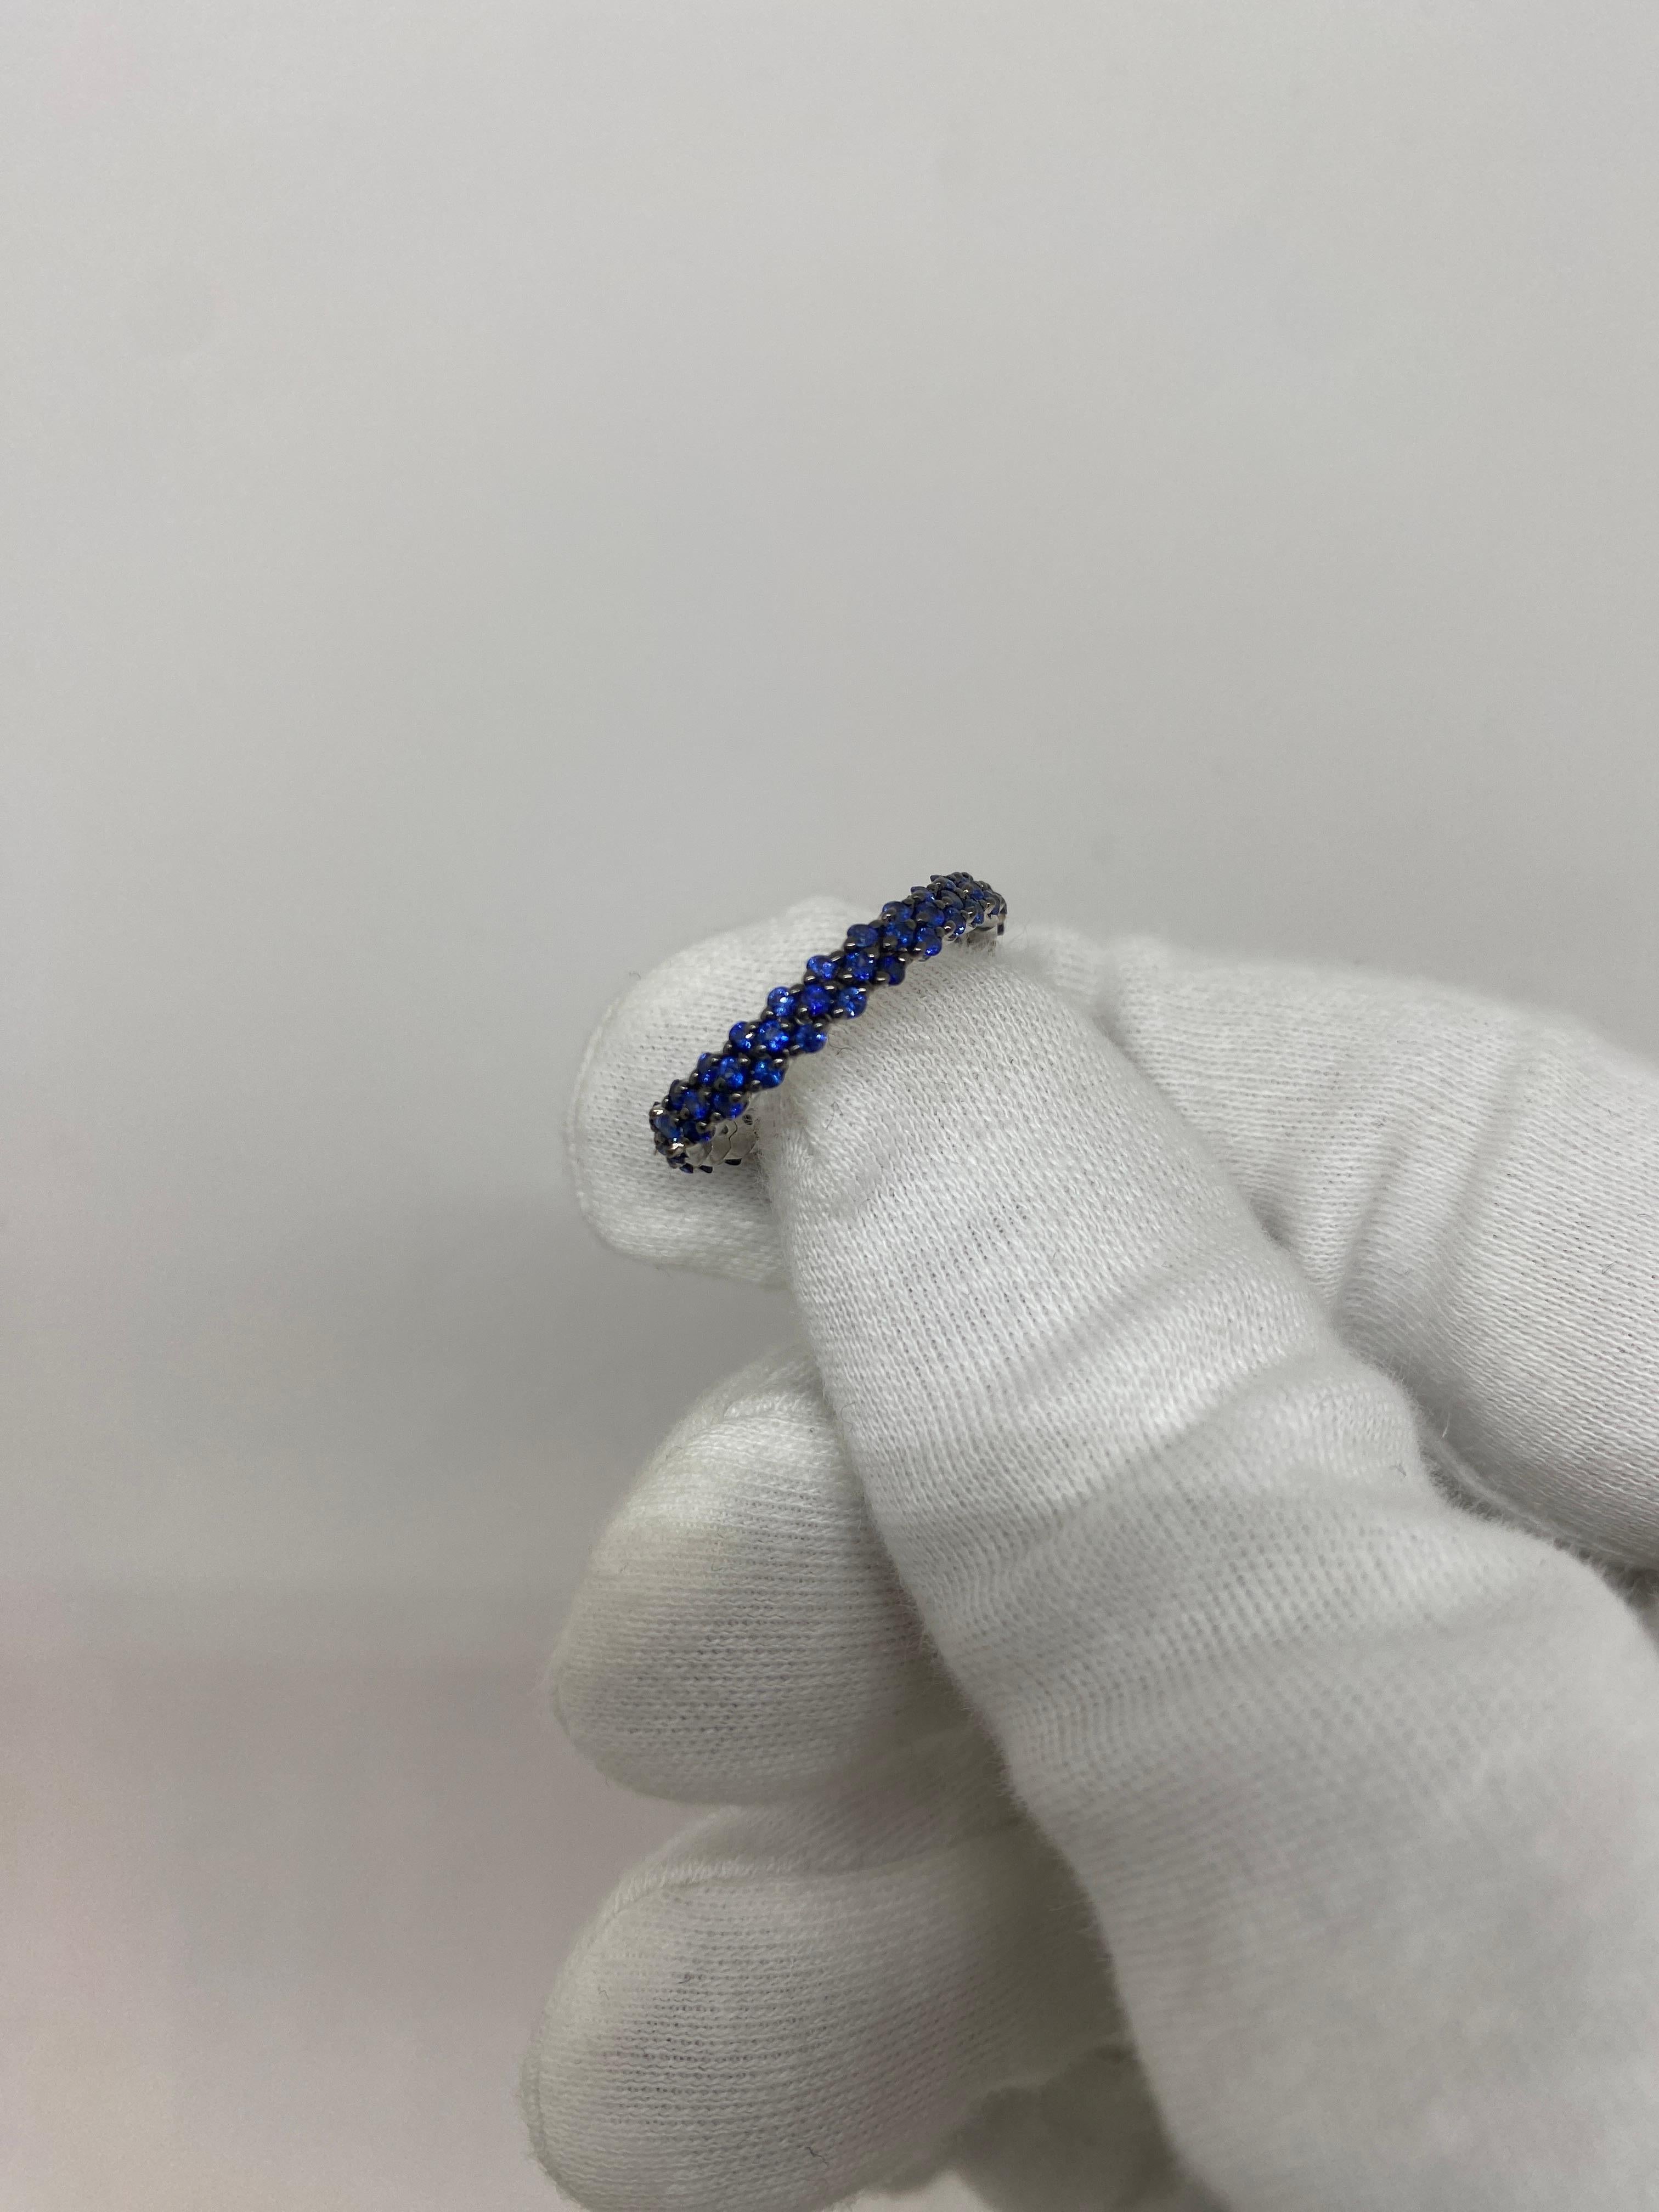 18Kt White Gold Riviere Ring Blue Sapphires 1.29 ct For Sale 2